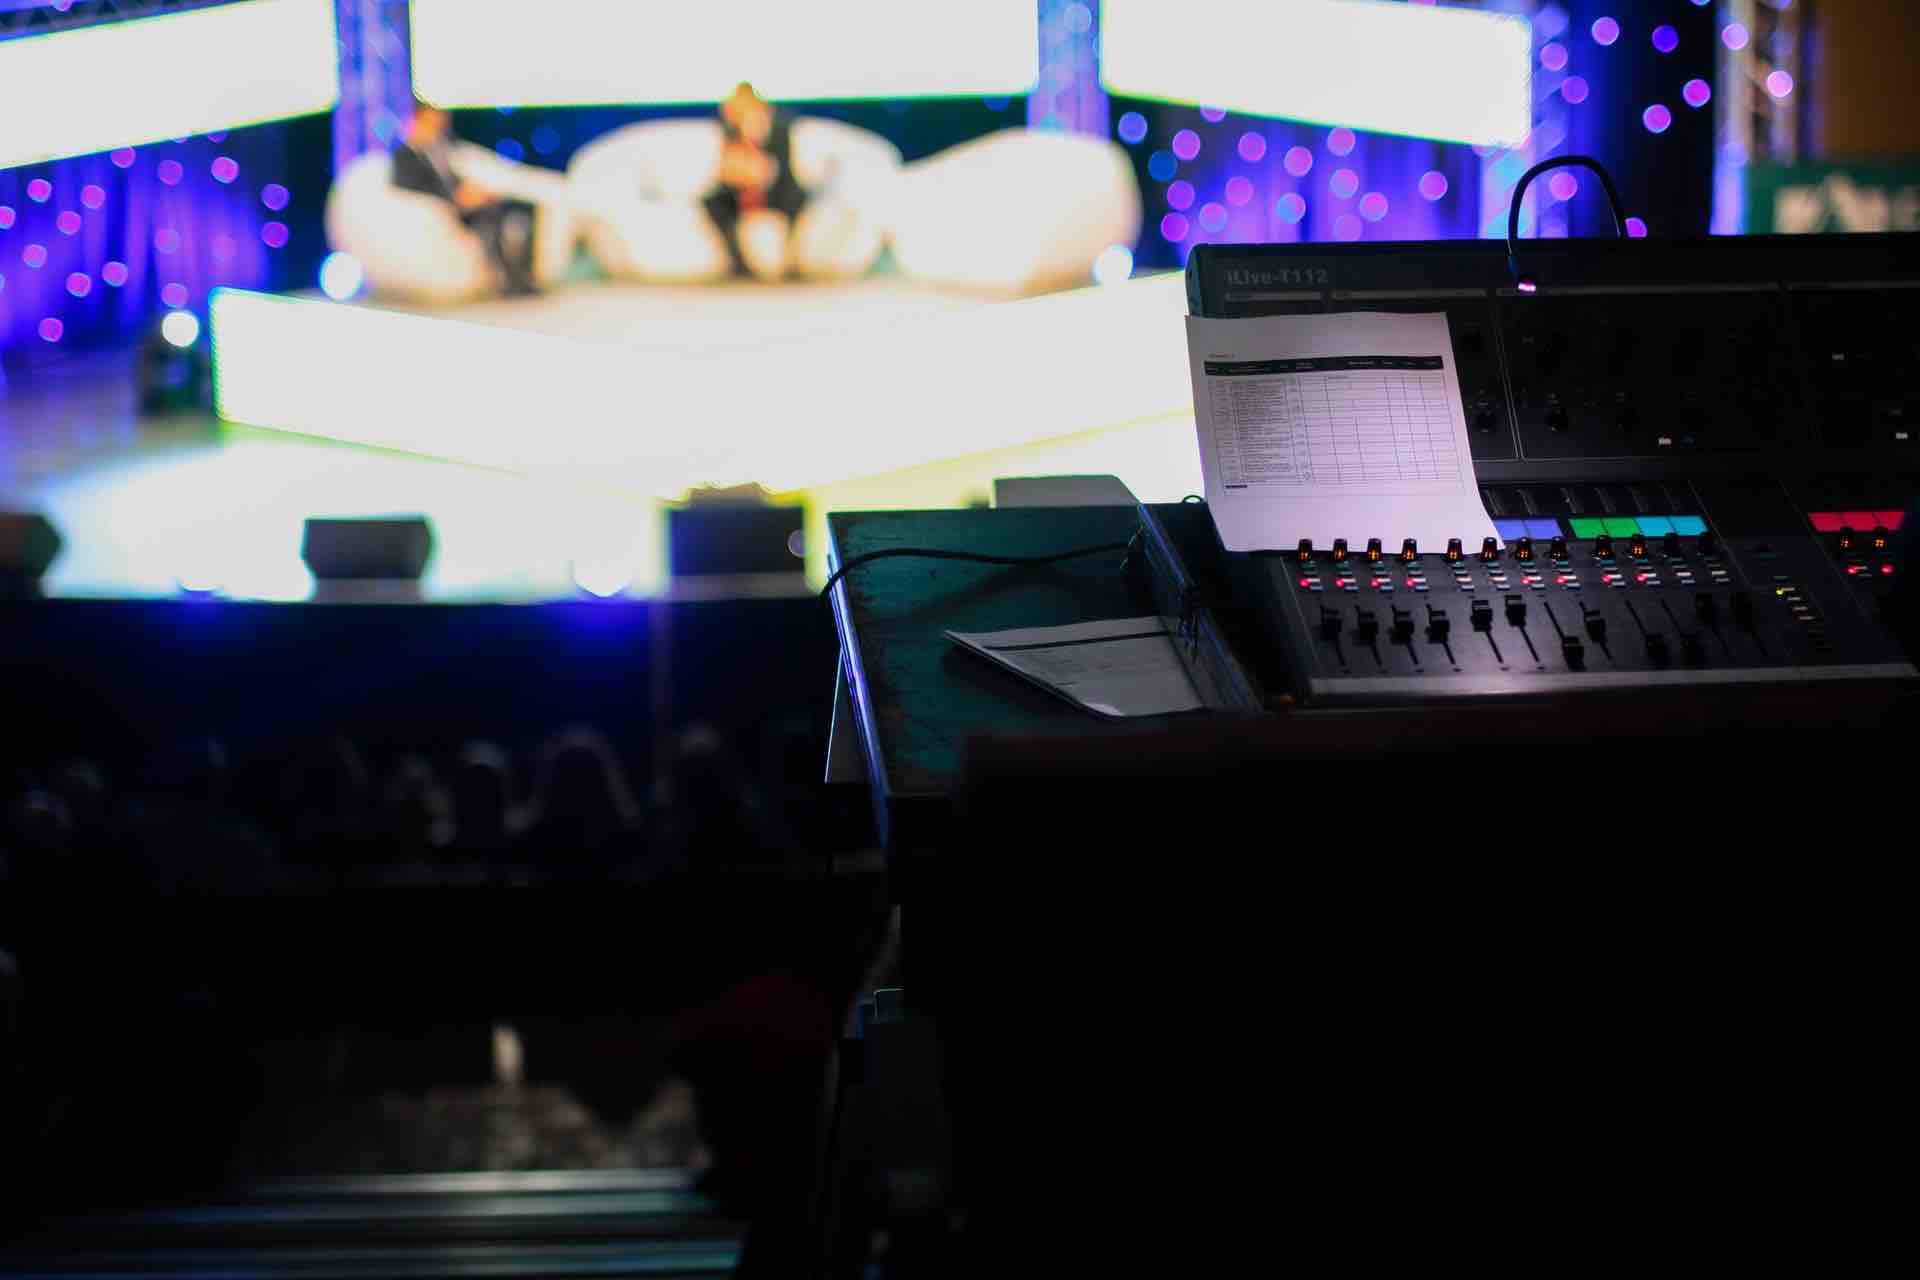 A view of a technical desk at an event